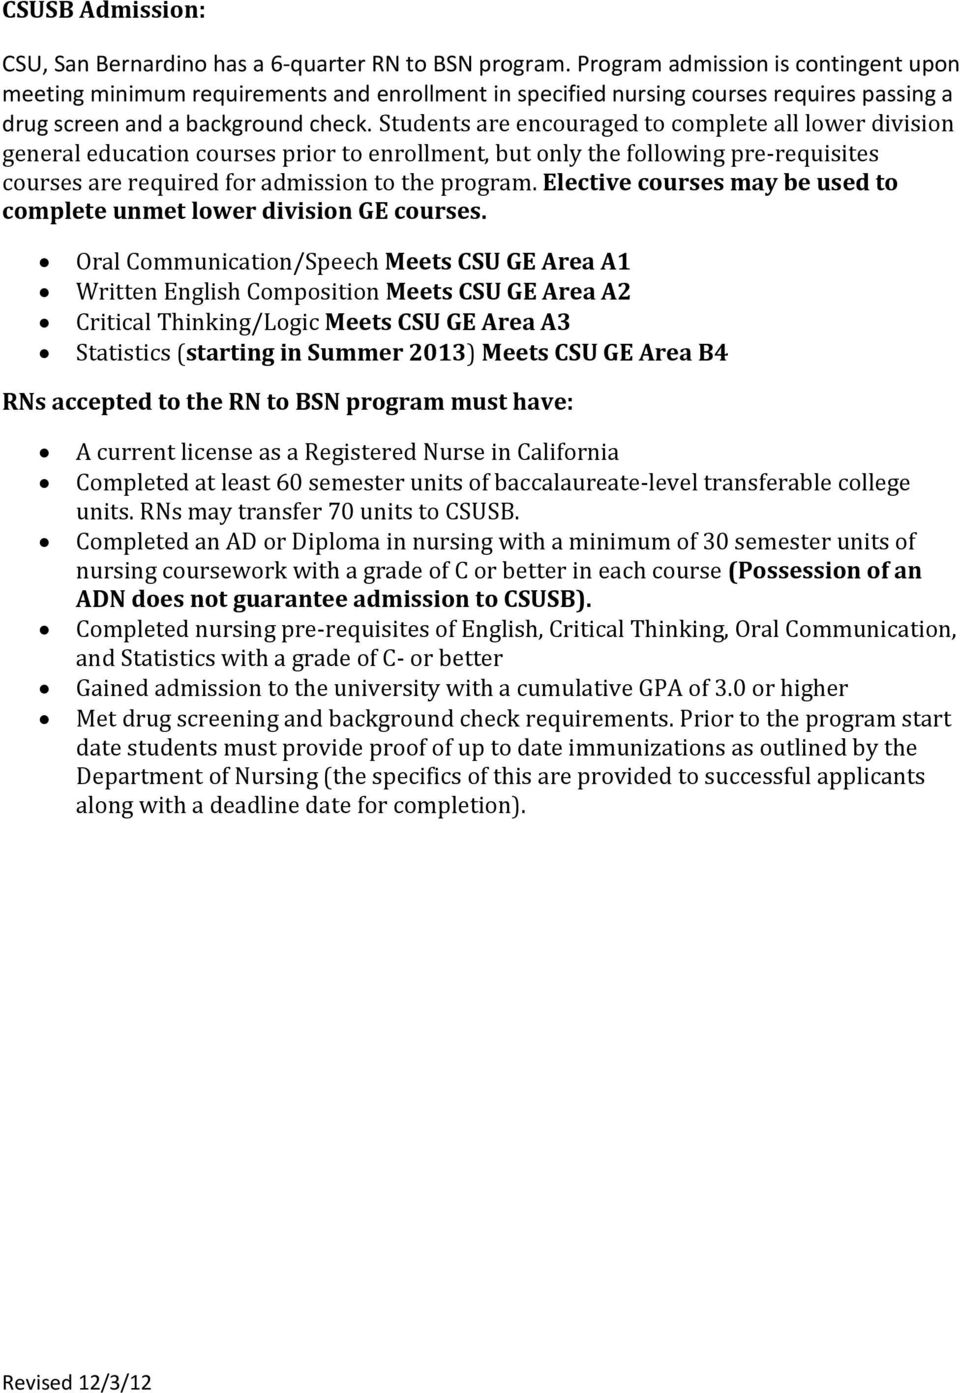 Students are encouraged to complete all lower division general education courses prior to enrollment, but only the following pre-requisites courses are required for admission to the program.